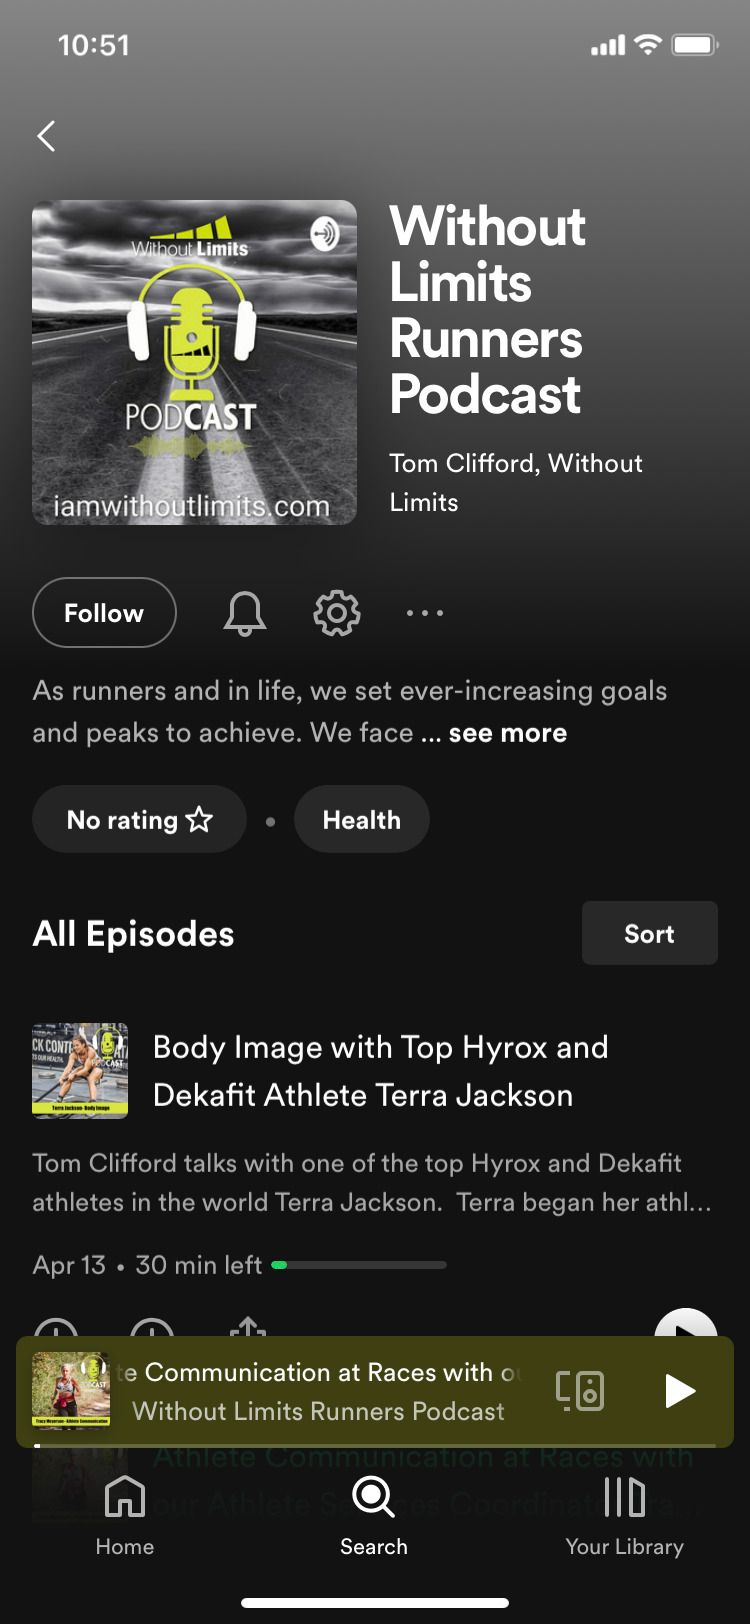 Without Limits Runners Podcast main screen